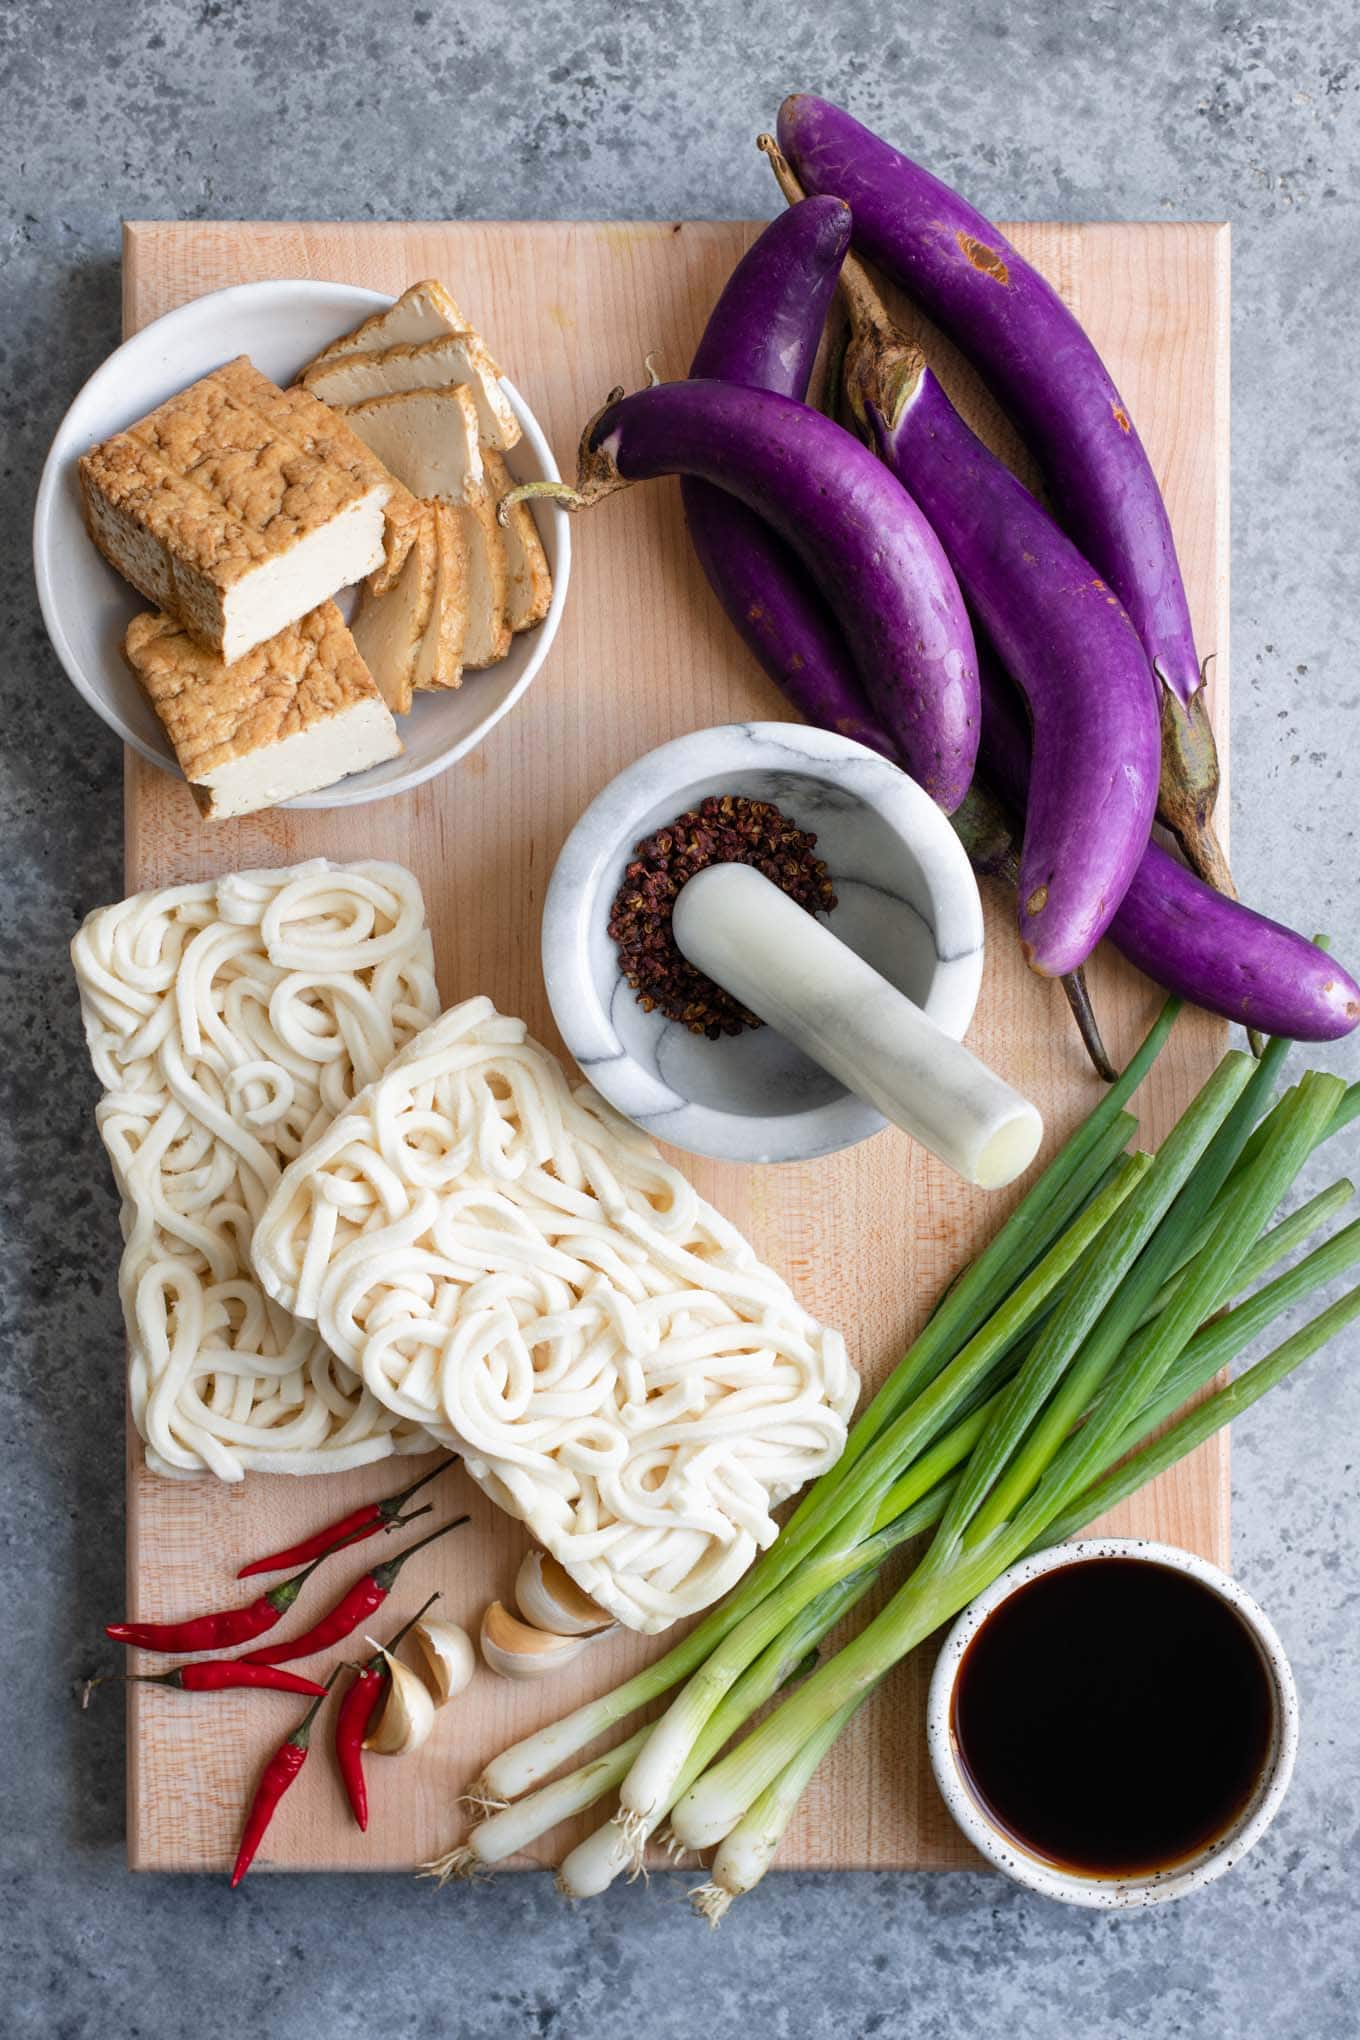 Spicy Sichuan Noodles with Eggplant • The Curious Chickpea